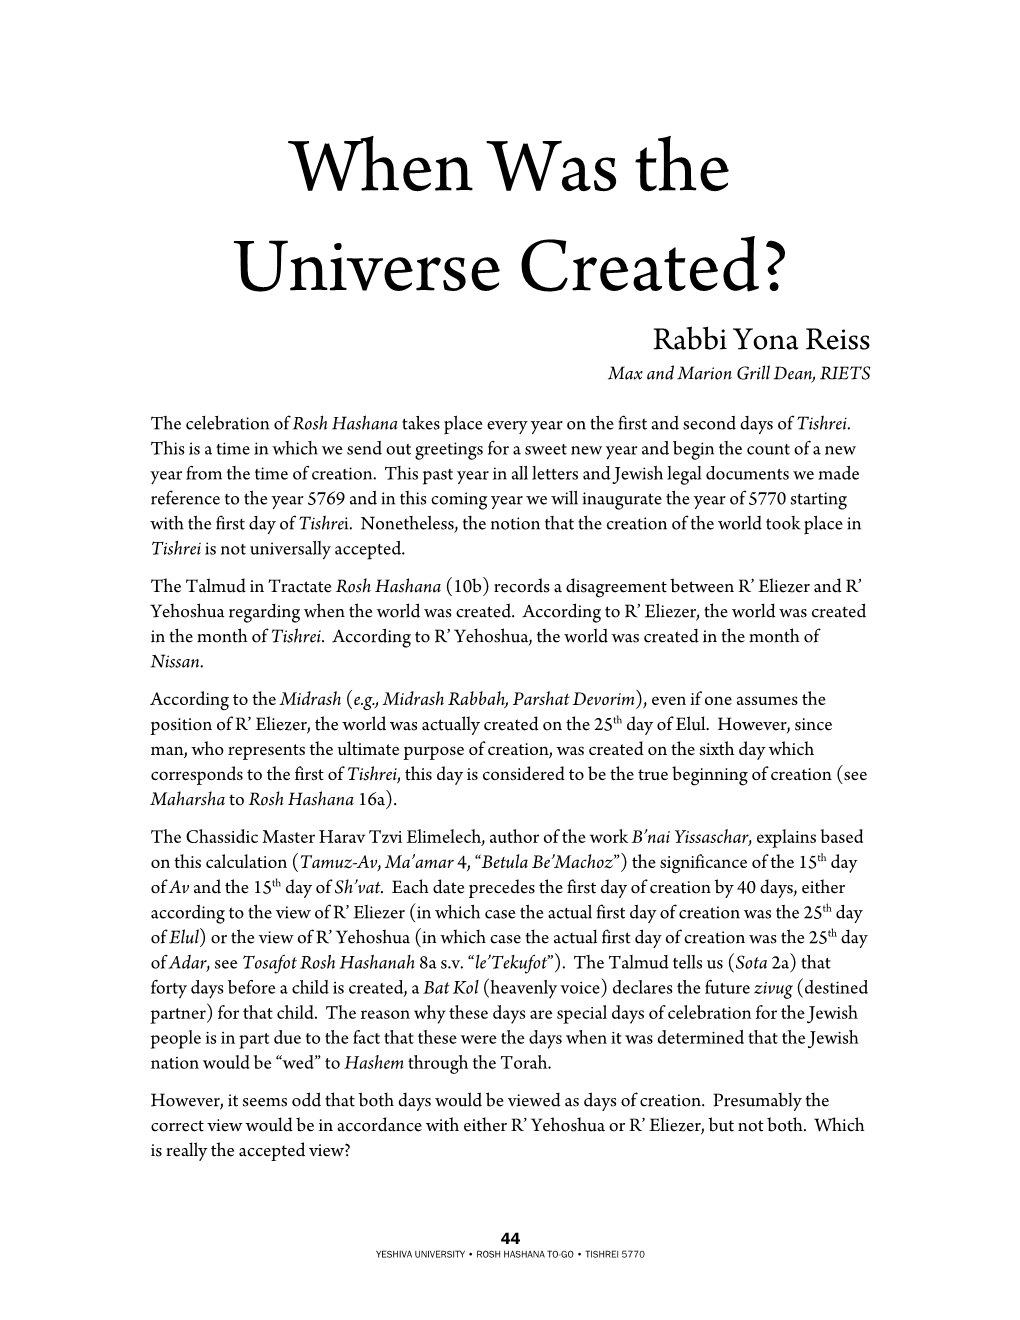 When Was the Universe Created? Rabbi Yona Reiss Max and Marion Grill Dean, RIETS